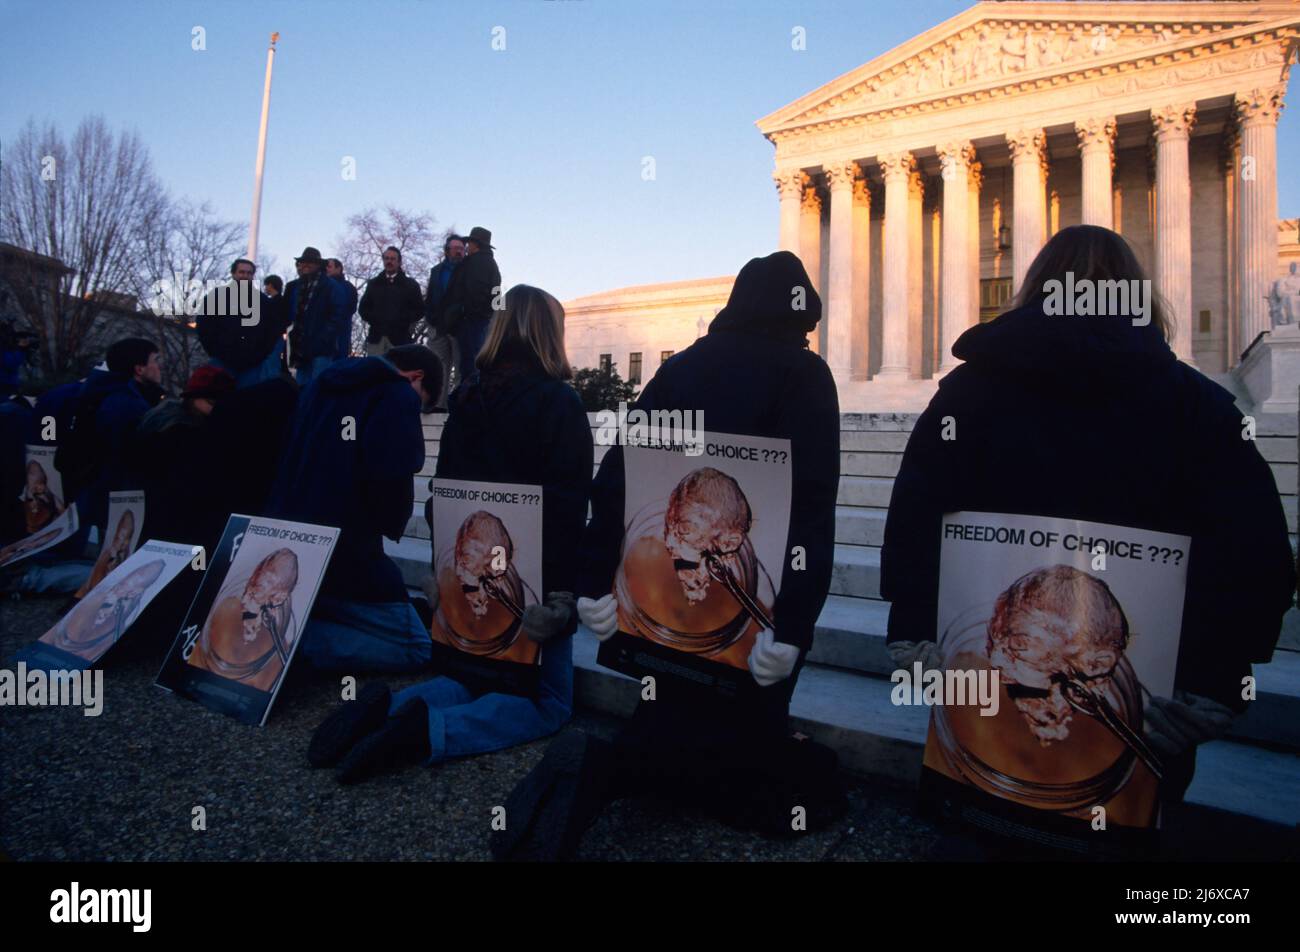 Pro Life activists march from the Ellipse to the Supreme Court January 23, 1995 in Washington, DC. The pro lifers were met with opposition groups in favor of abortion. Stock Photo